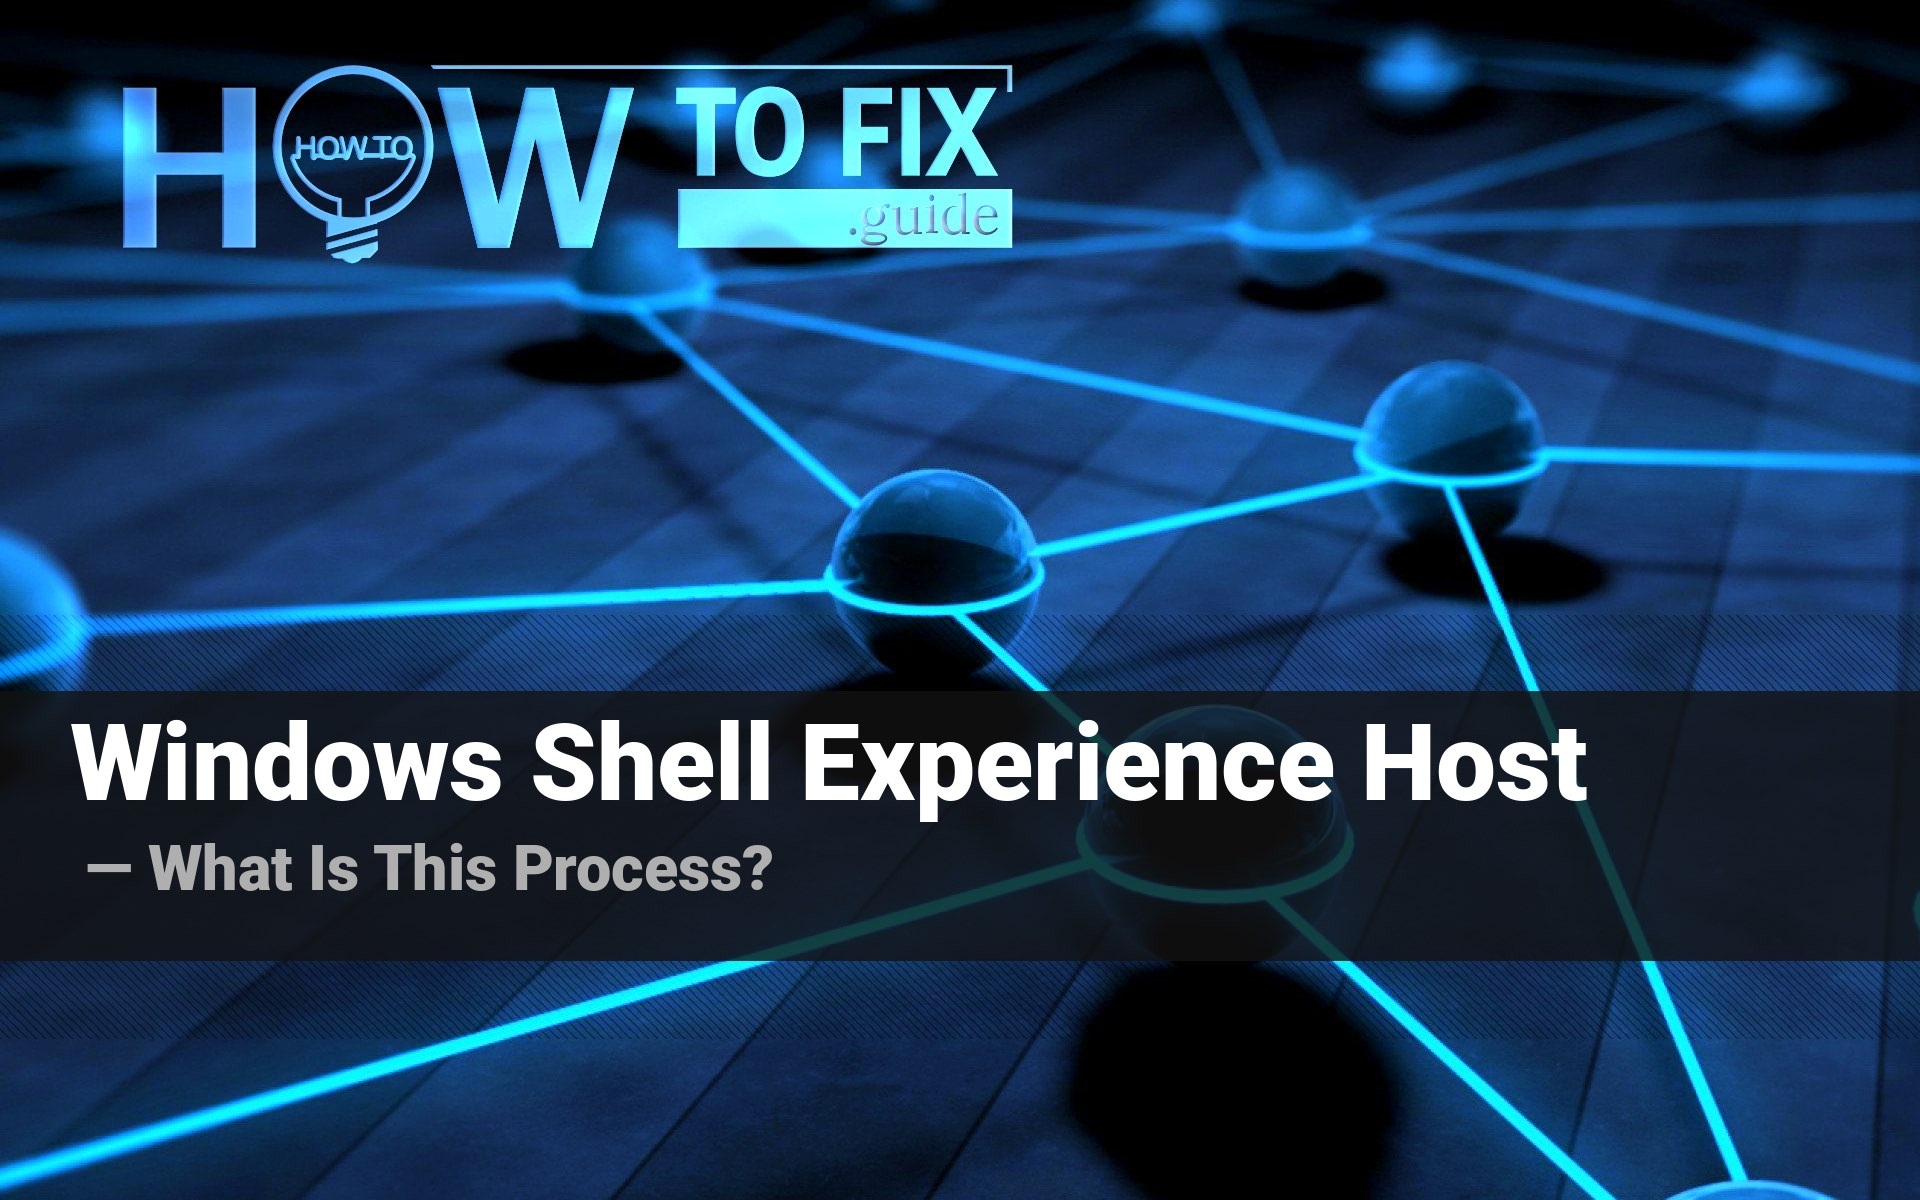 How to resolve Windows Shell Experience Host (ShellExperienceHost.exe) issues?